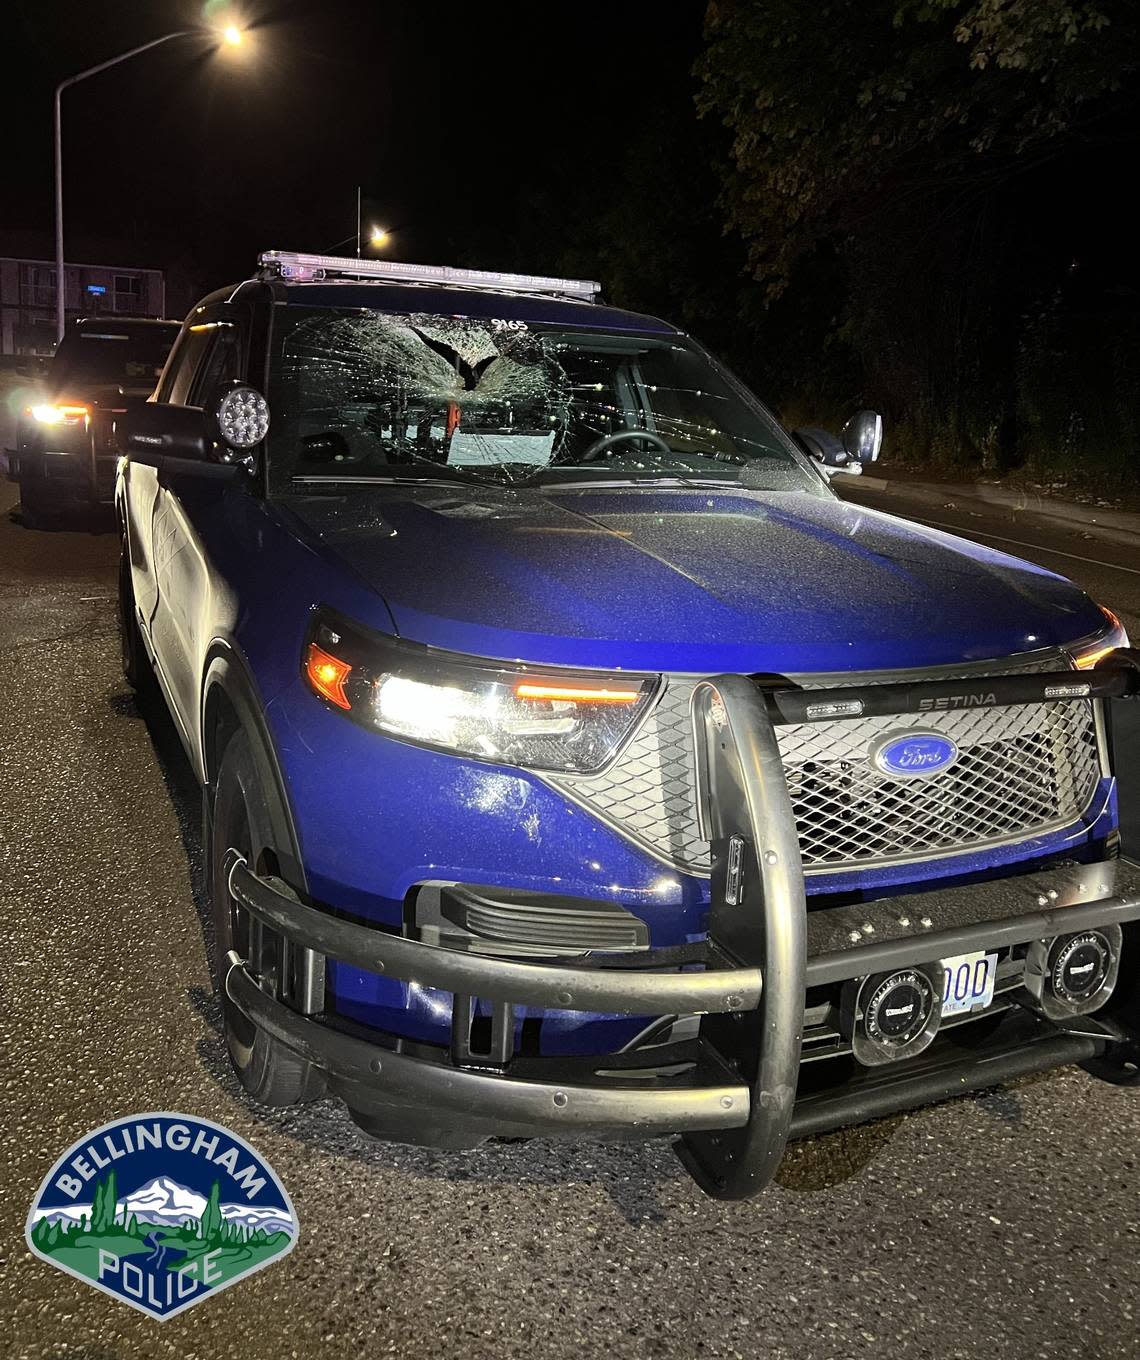 A man reportedly threw a 25-pound piece of railroad tie at a passing Bellingham Police Department patrol vehicle early Saturday, smashing the windshield.